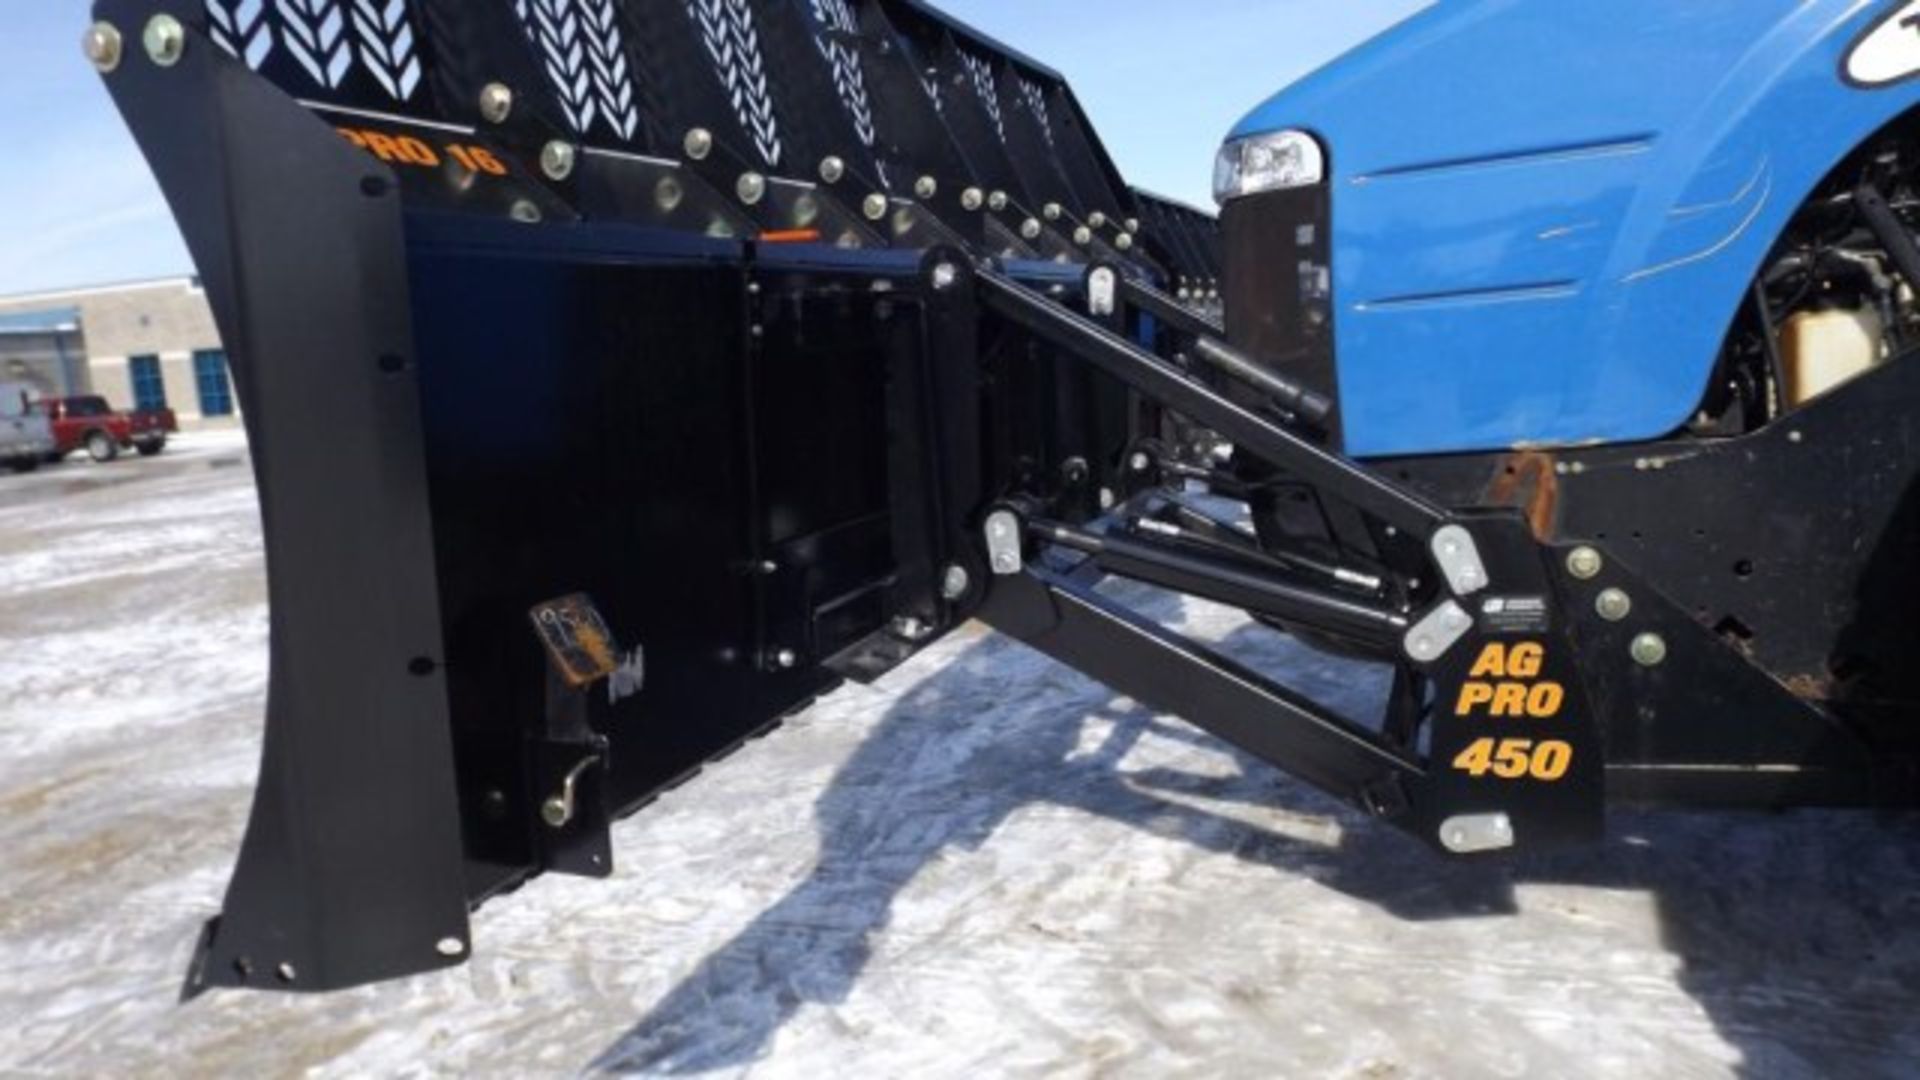 NEW" Ag Pro 450 Grouser 16' Front Blade & Bracket Selling off of TJ500, (Seller will remove if